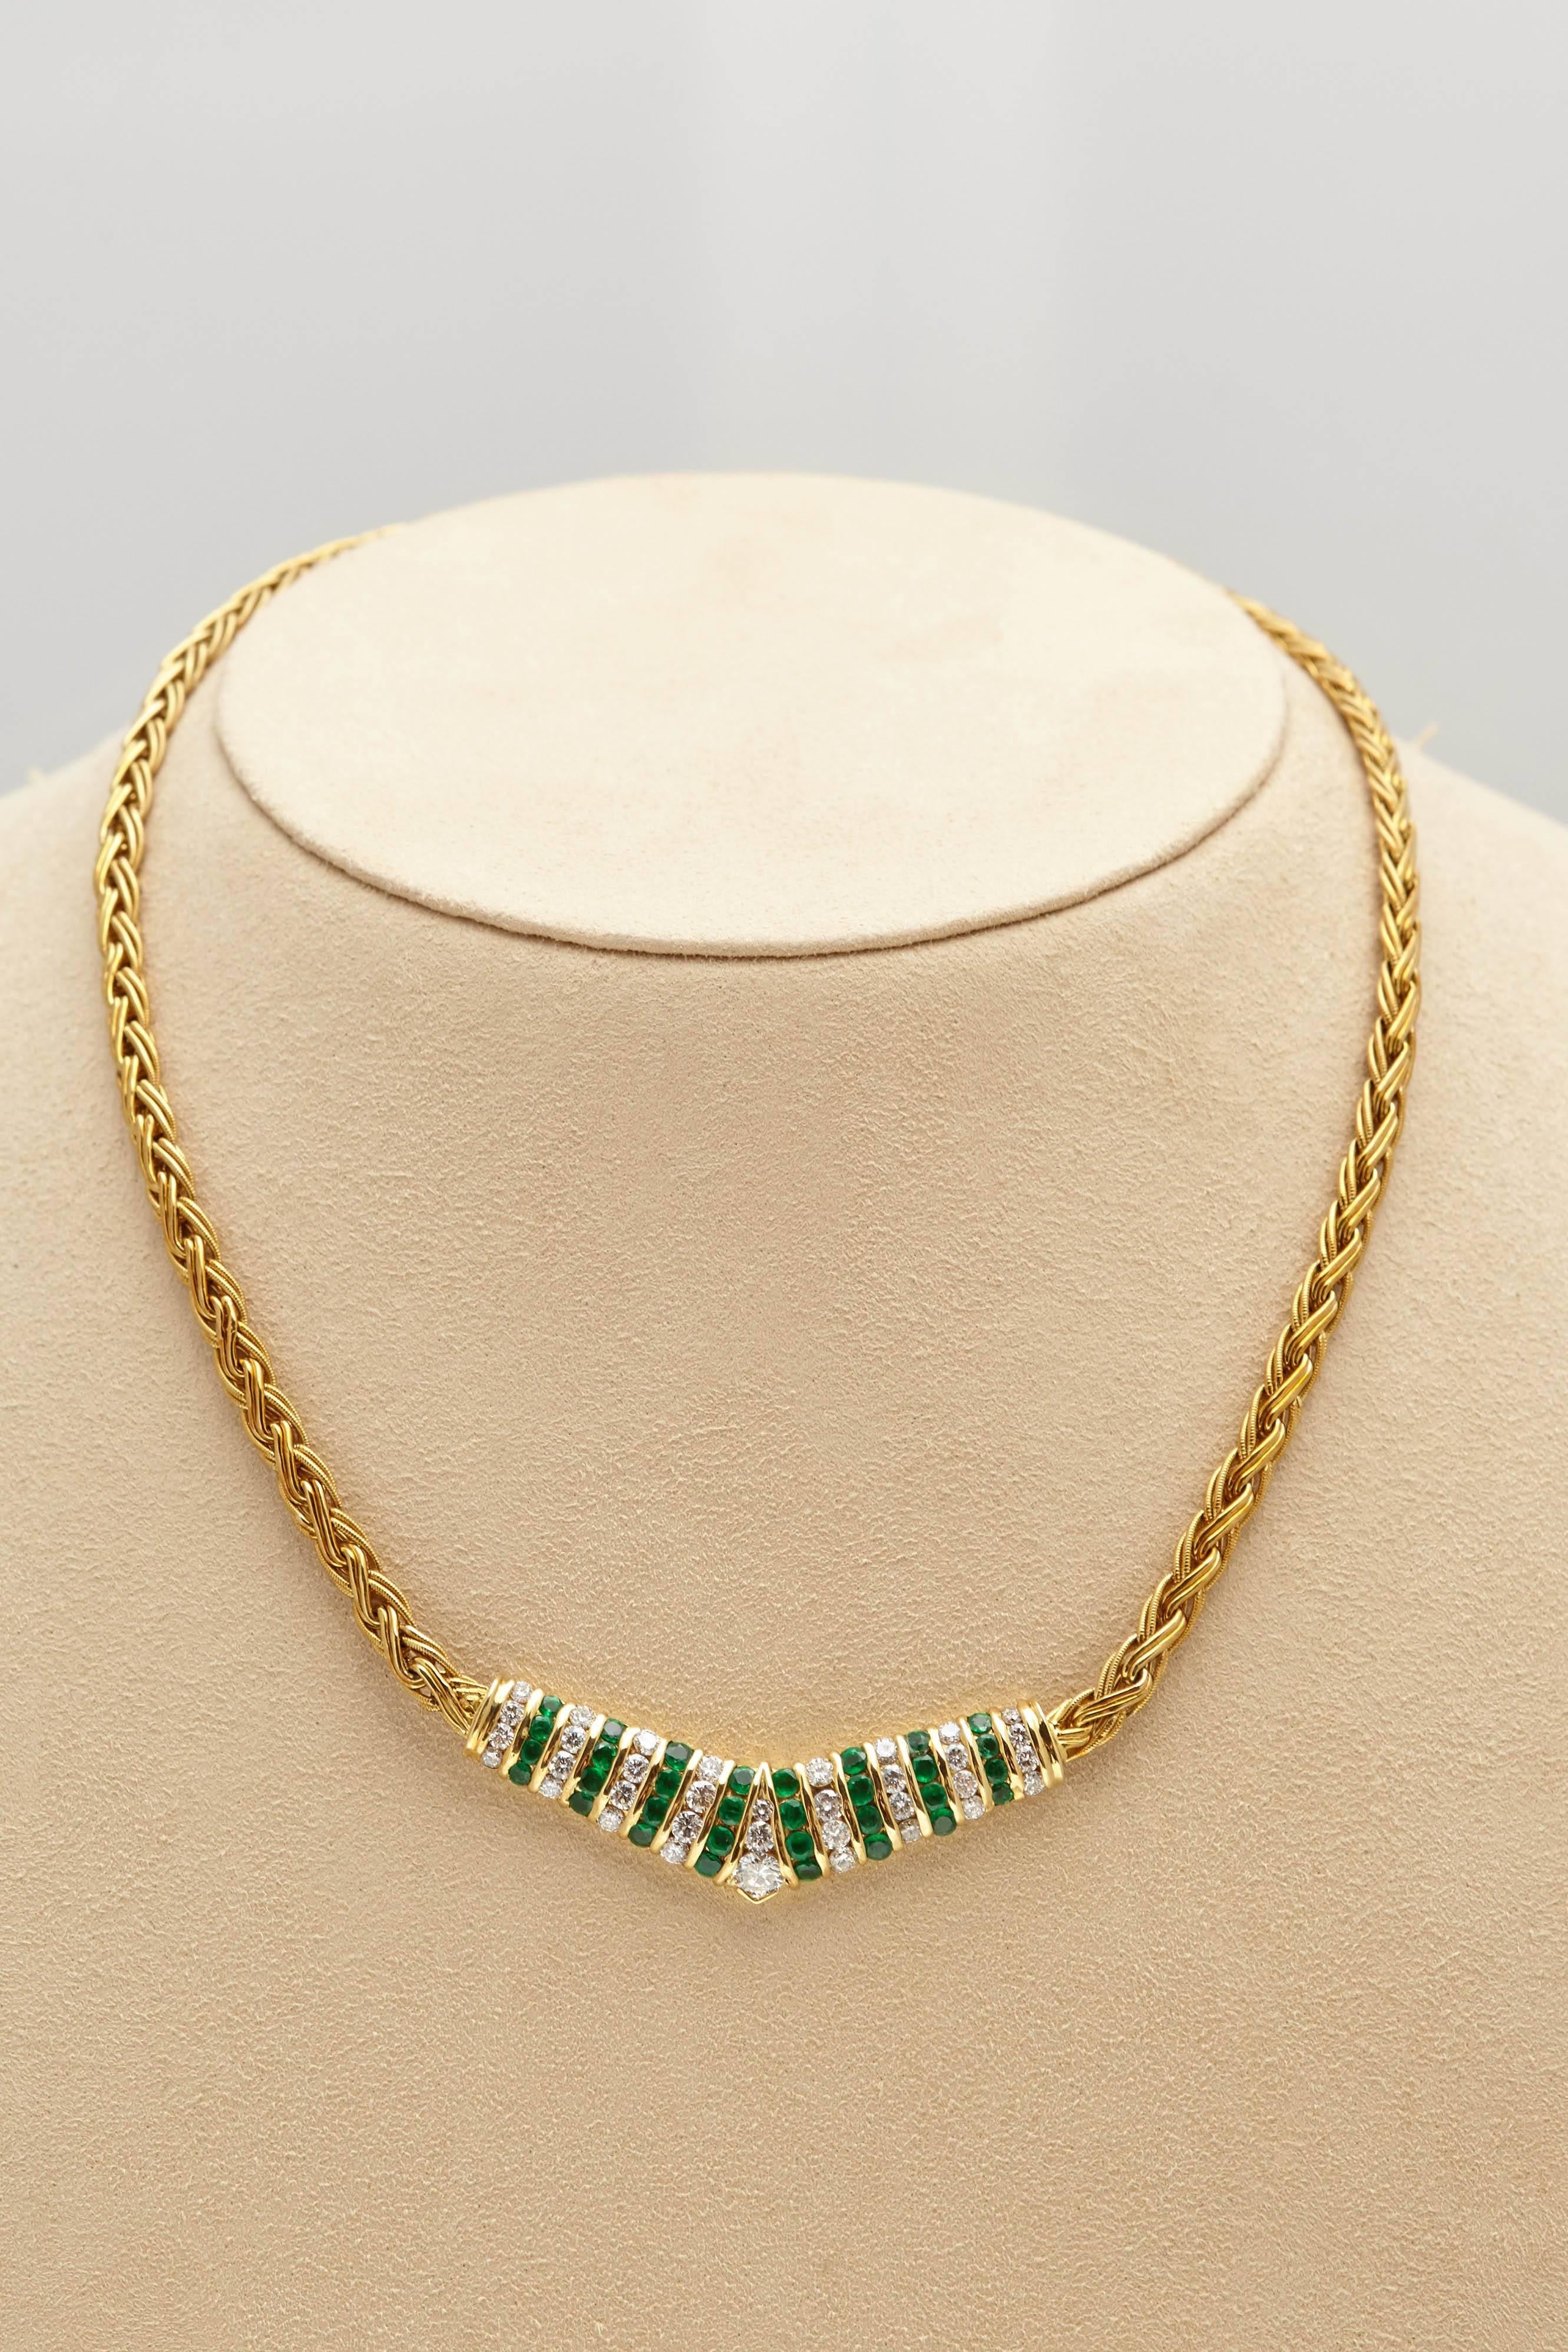 Matching Set 18 Karat Gold Diamonds Emeralds Necklace and Earrings In Excellent Condition For Sale In New York, NY